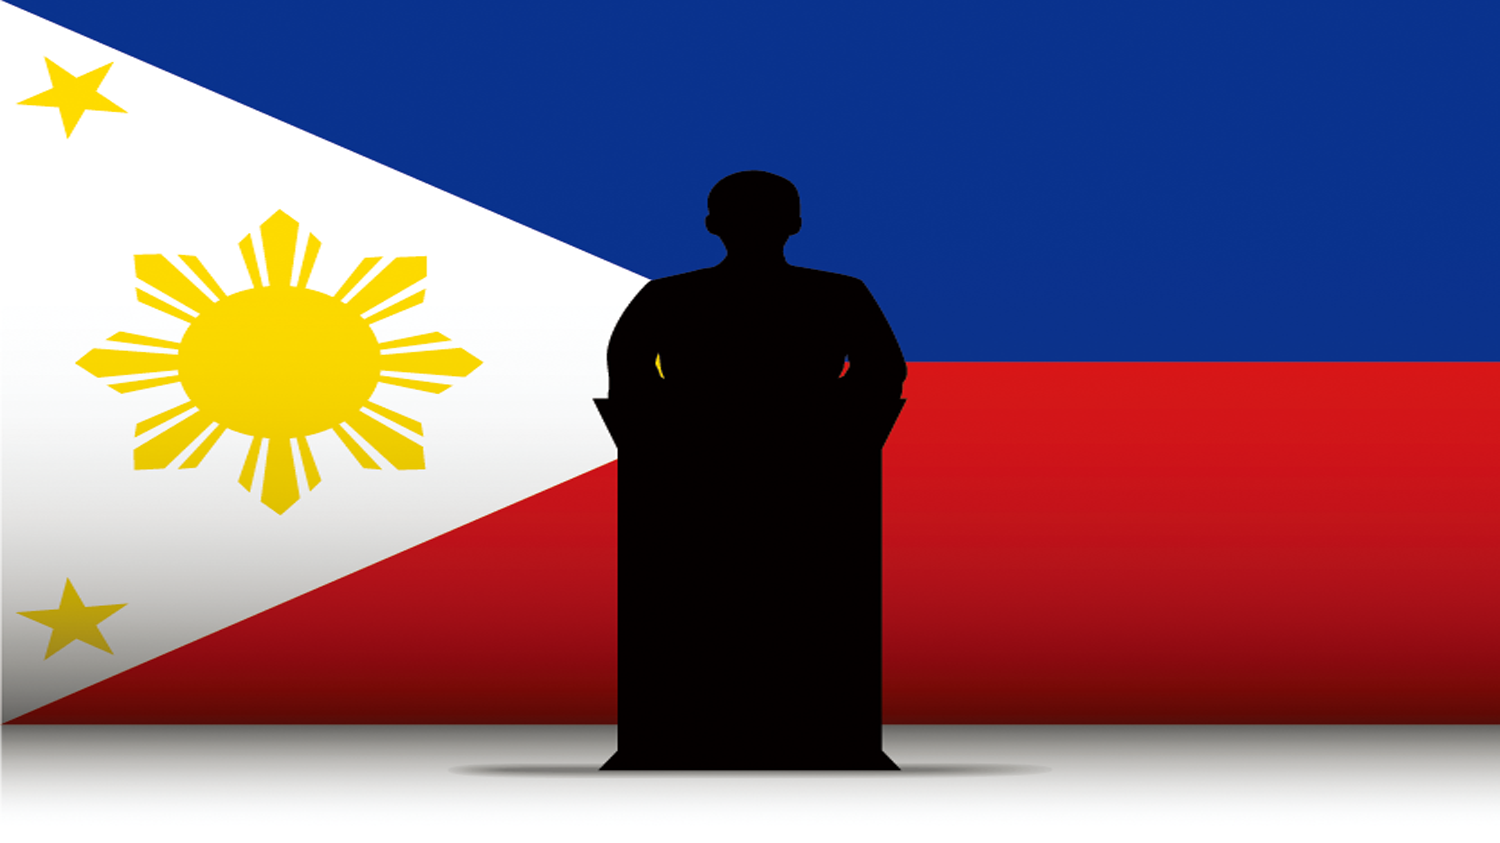 [ADRN Issue Briefing] The 2022 Philippine Elections Primer: A Democratic Citizenship Perspective